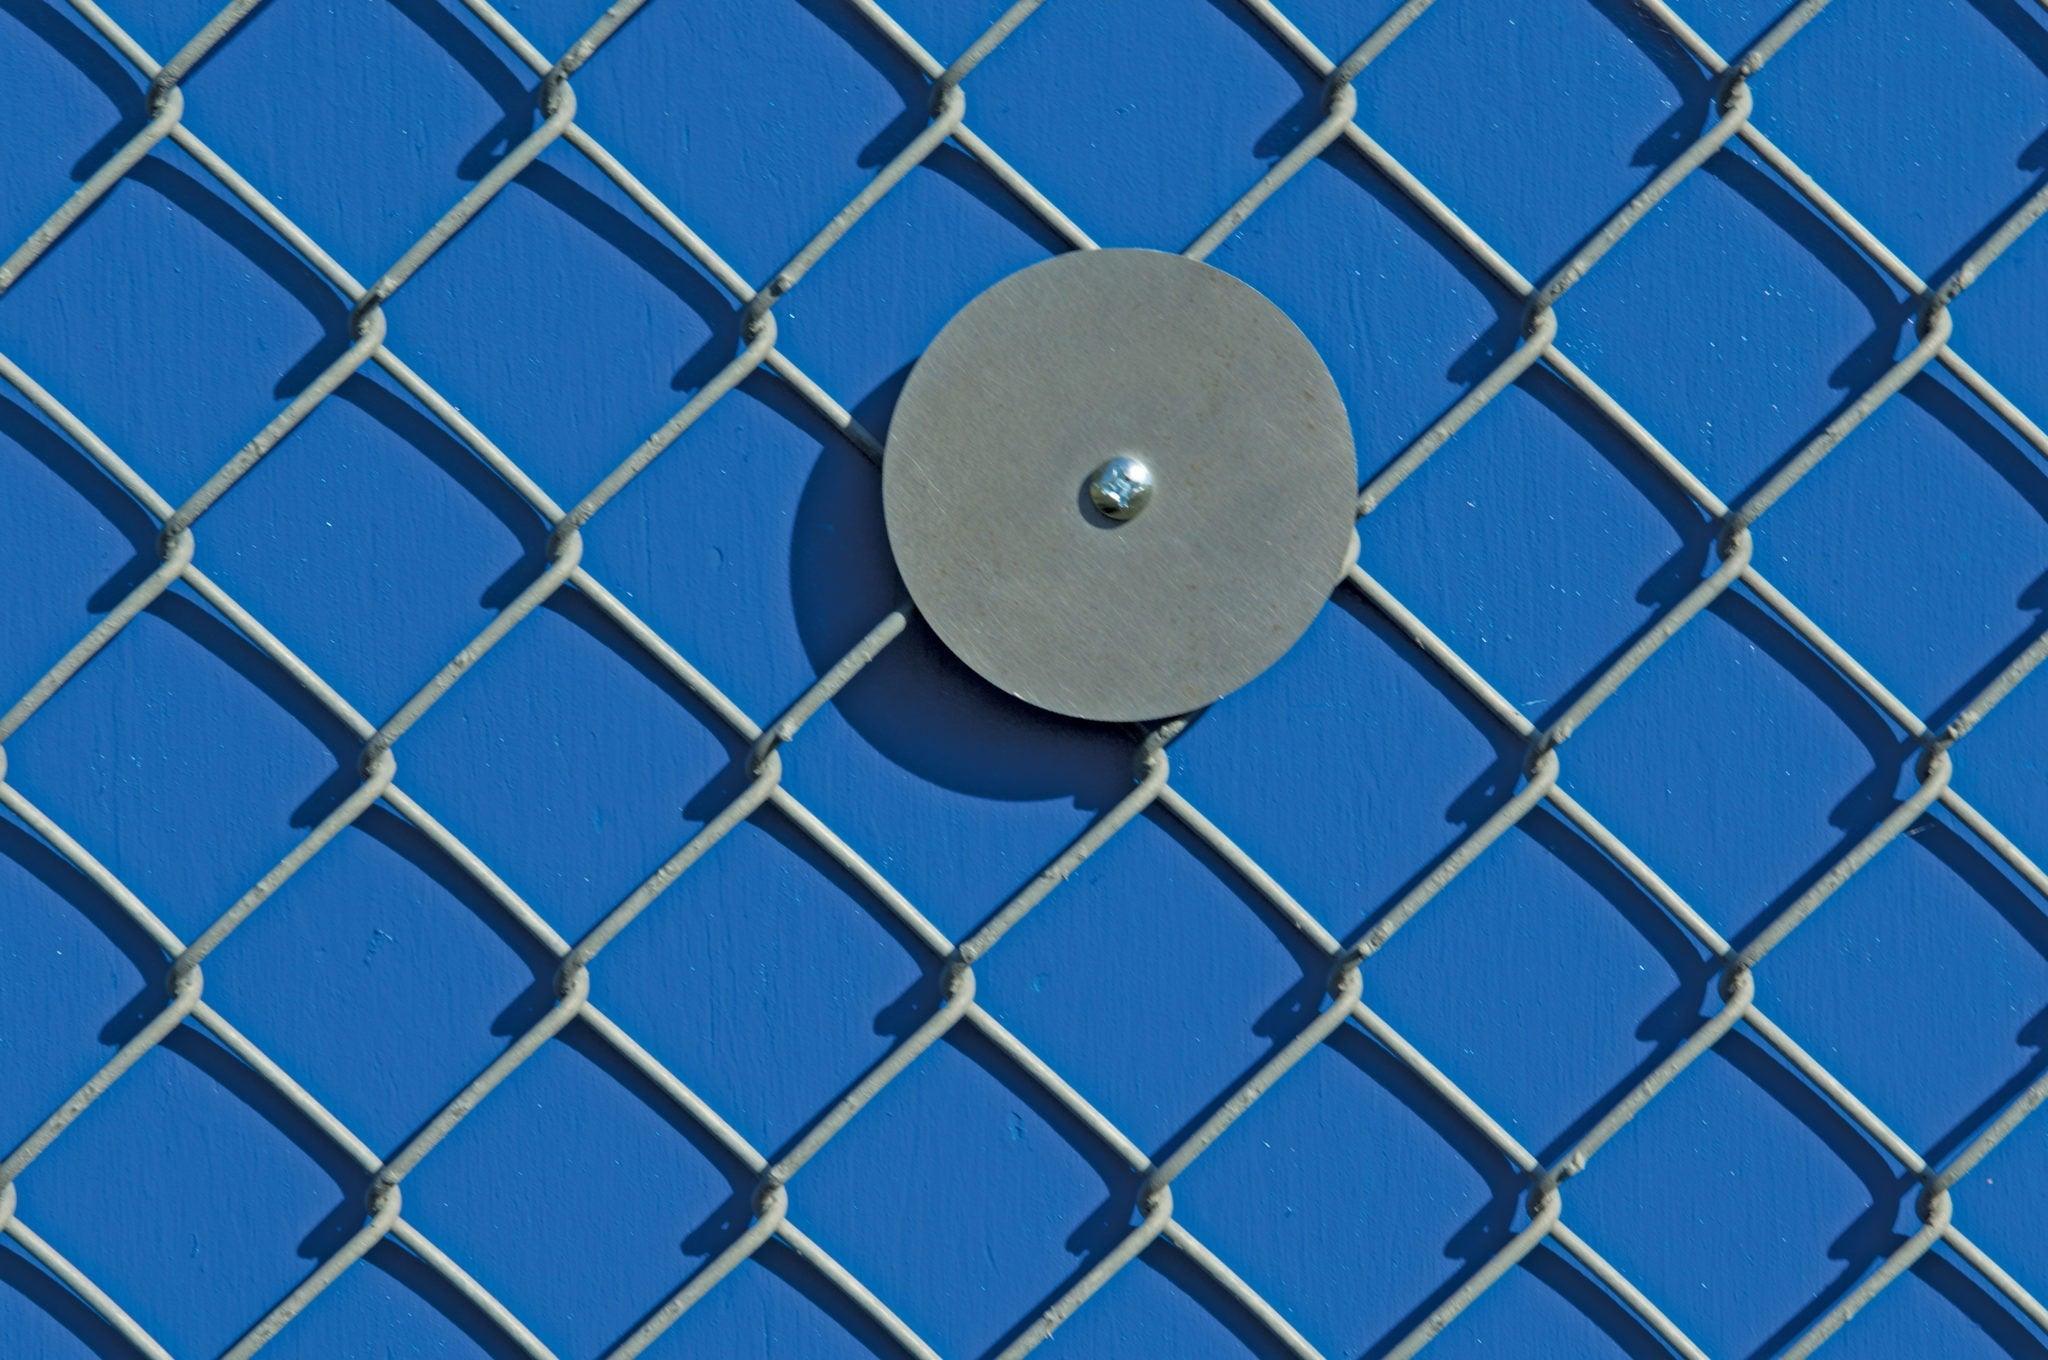 Outdoor Field Wall Pads for Chain Link Fences - 6x4 ft